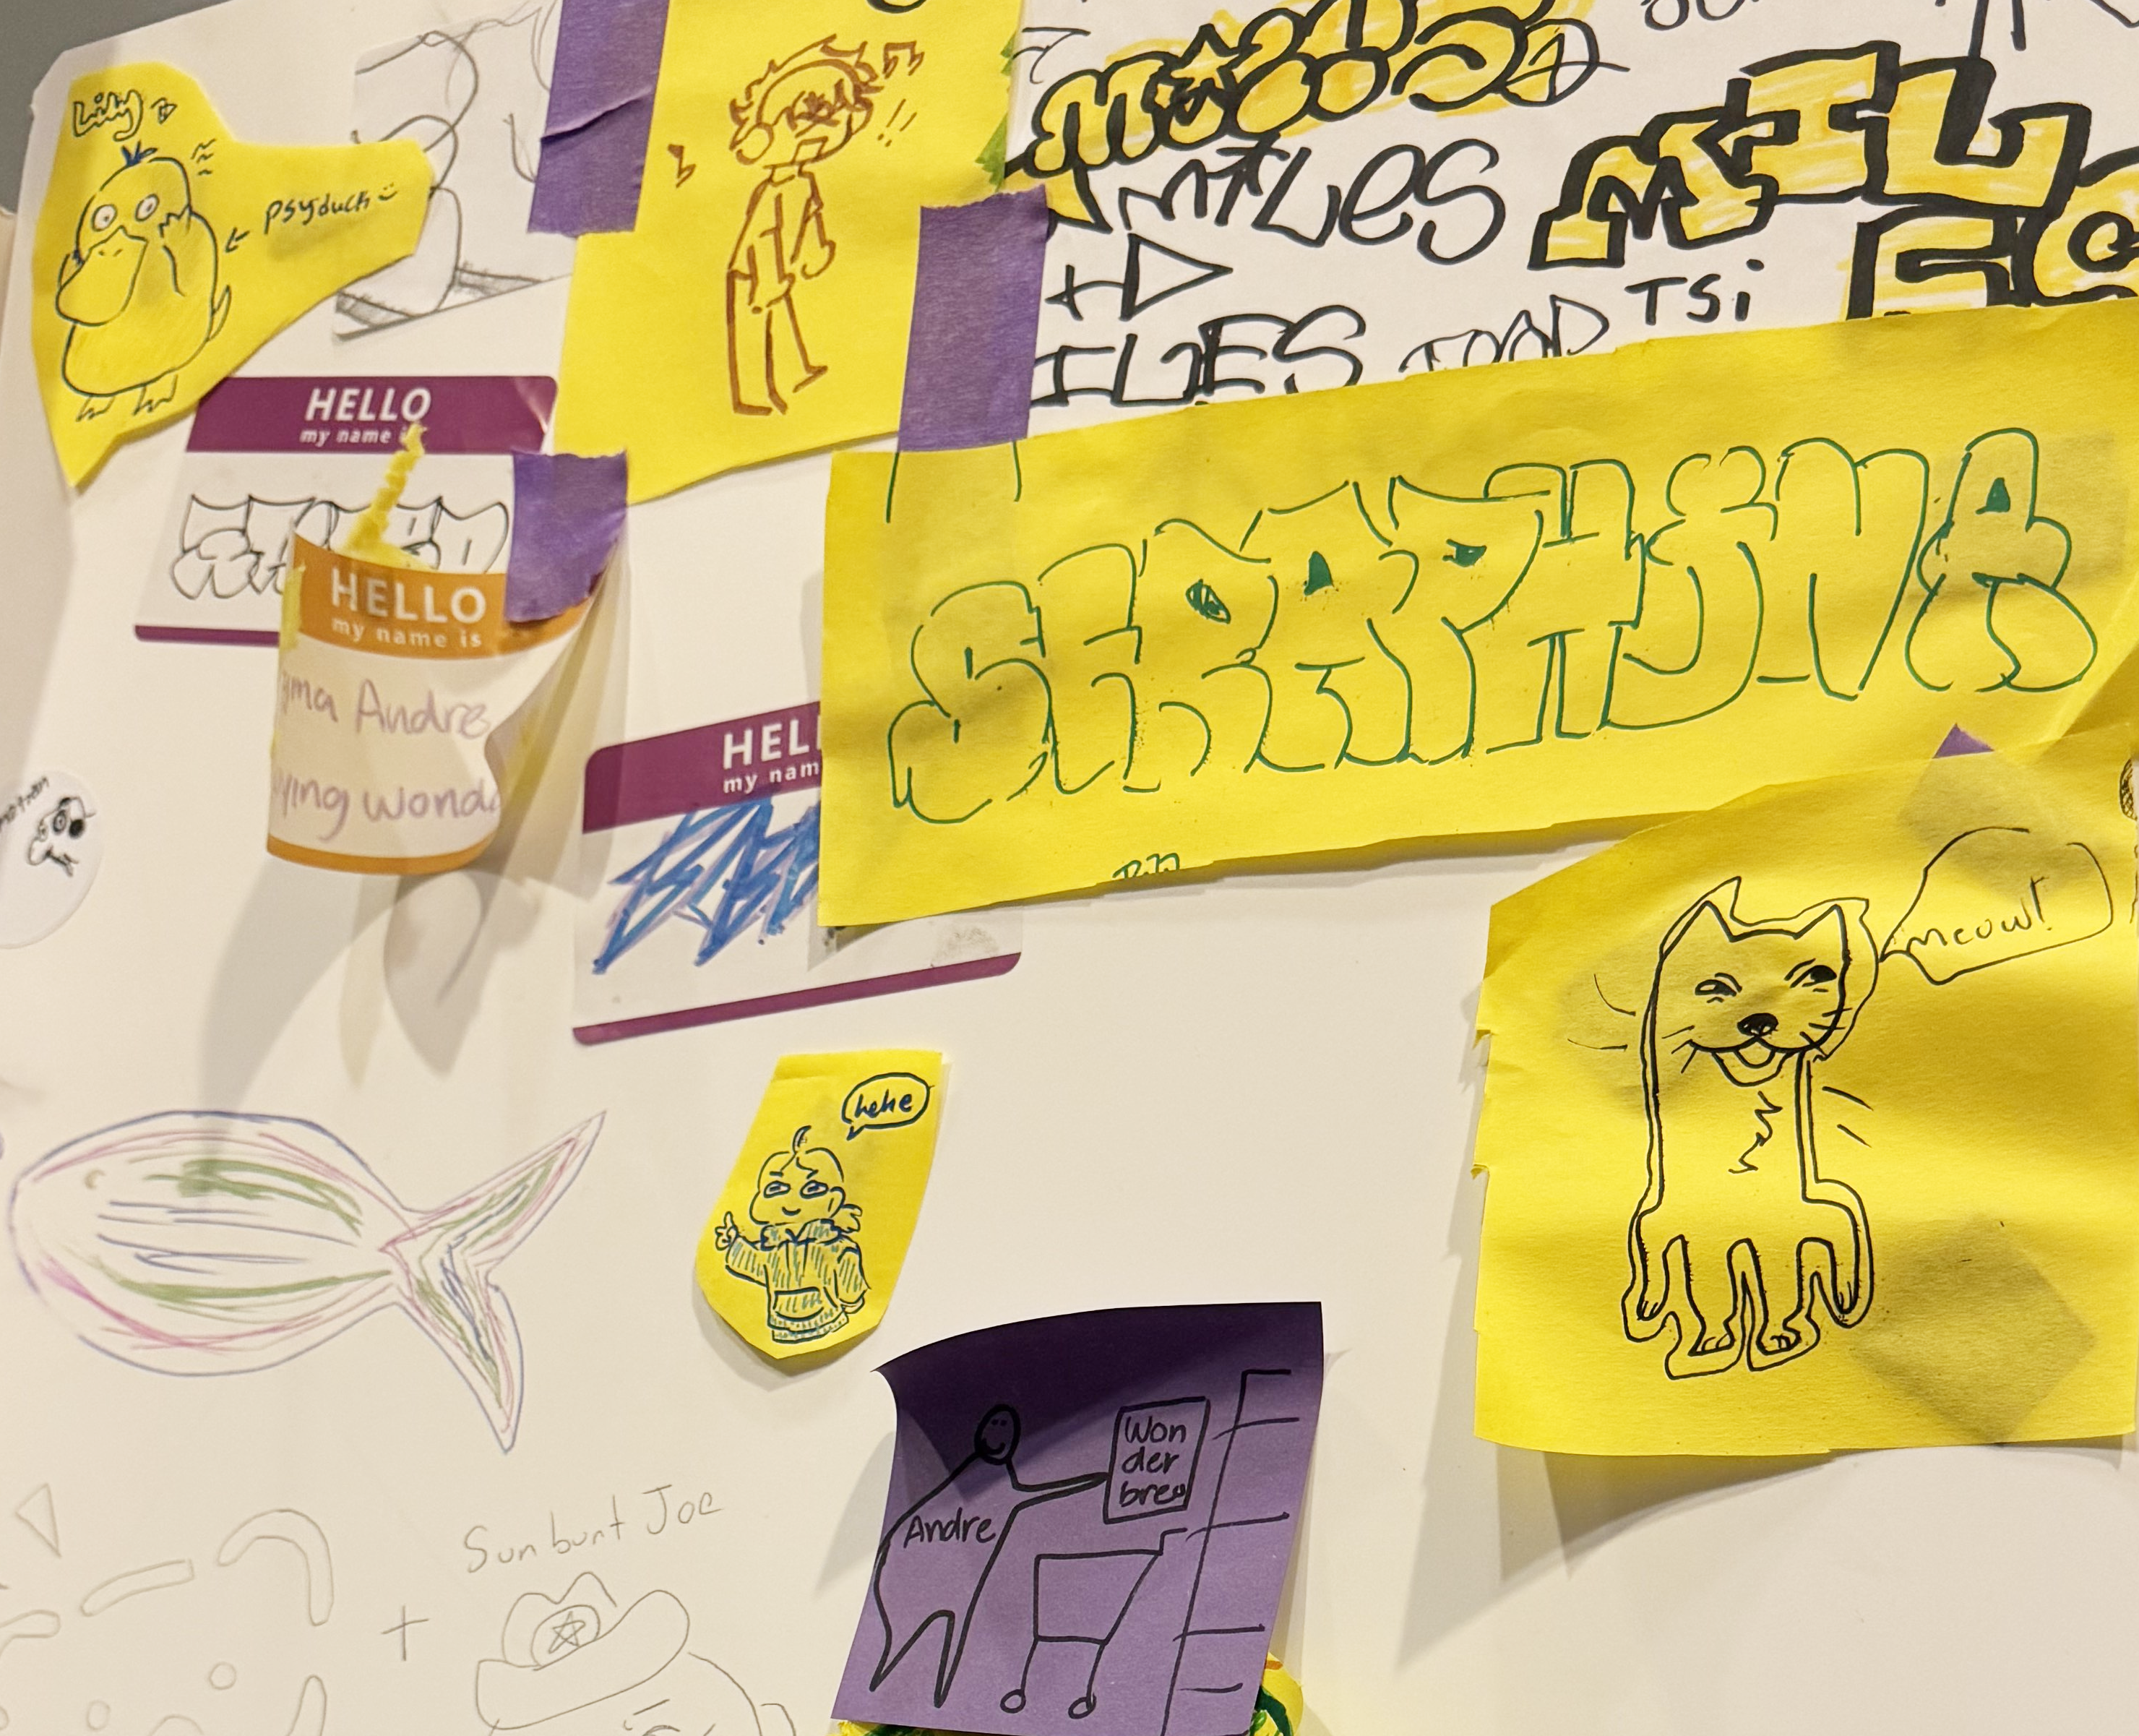 Drawings on yellow construction paper in various sized cutout pieces and on hello stickers have been taped onto a white board with thick purple masking tape.